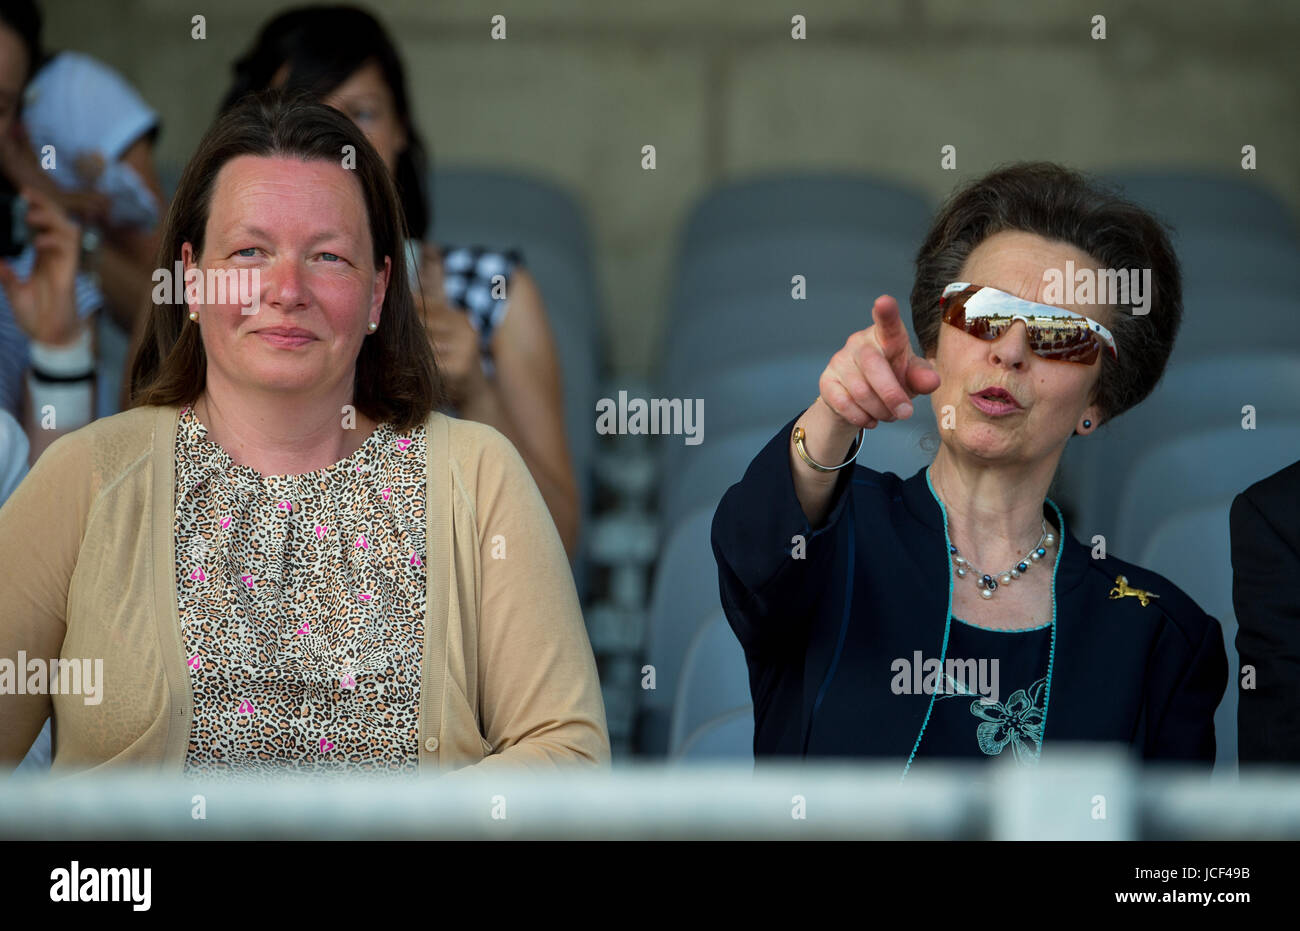 Luhmuehlen, Germany. 15th June, 2017. The British princess Anne watches a children's equestrian competition next to the chairwoman of the tourney company Luhmuehlen GmbH, Julia Otto (L), in Luhmuehlen, Germany, 15 June 2017. She has been patron to the traditional tourney in the Lueneburger Heide region, south of Hamburg. Photo: Philipp Schulze/dpa/Alamy Live News Stock Photo